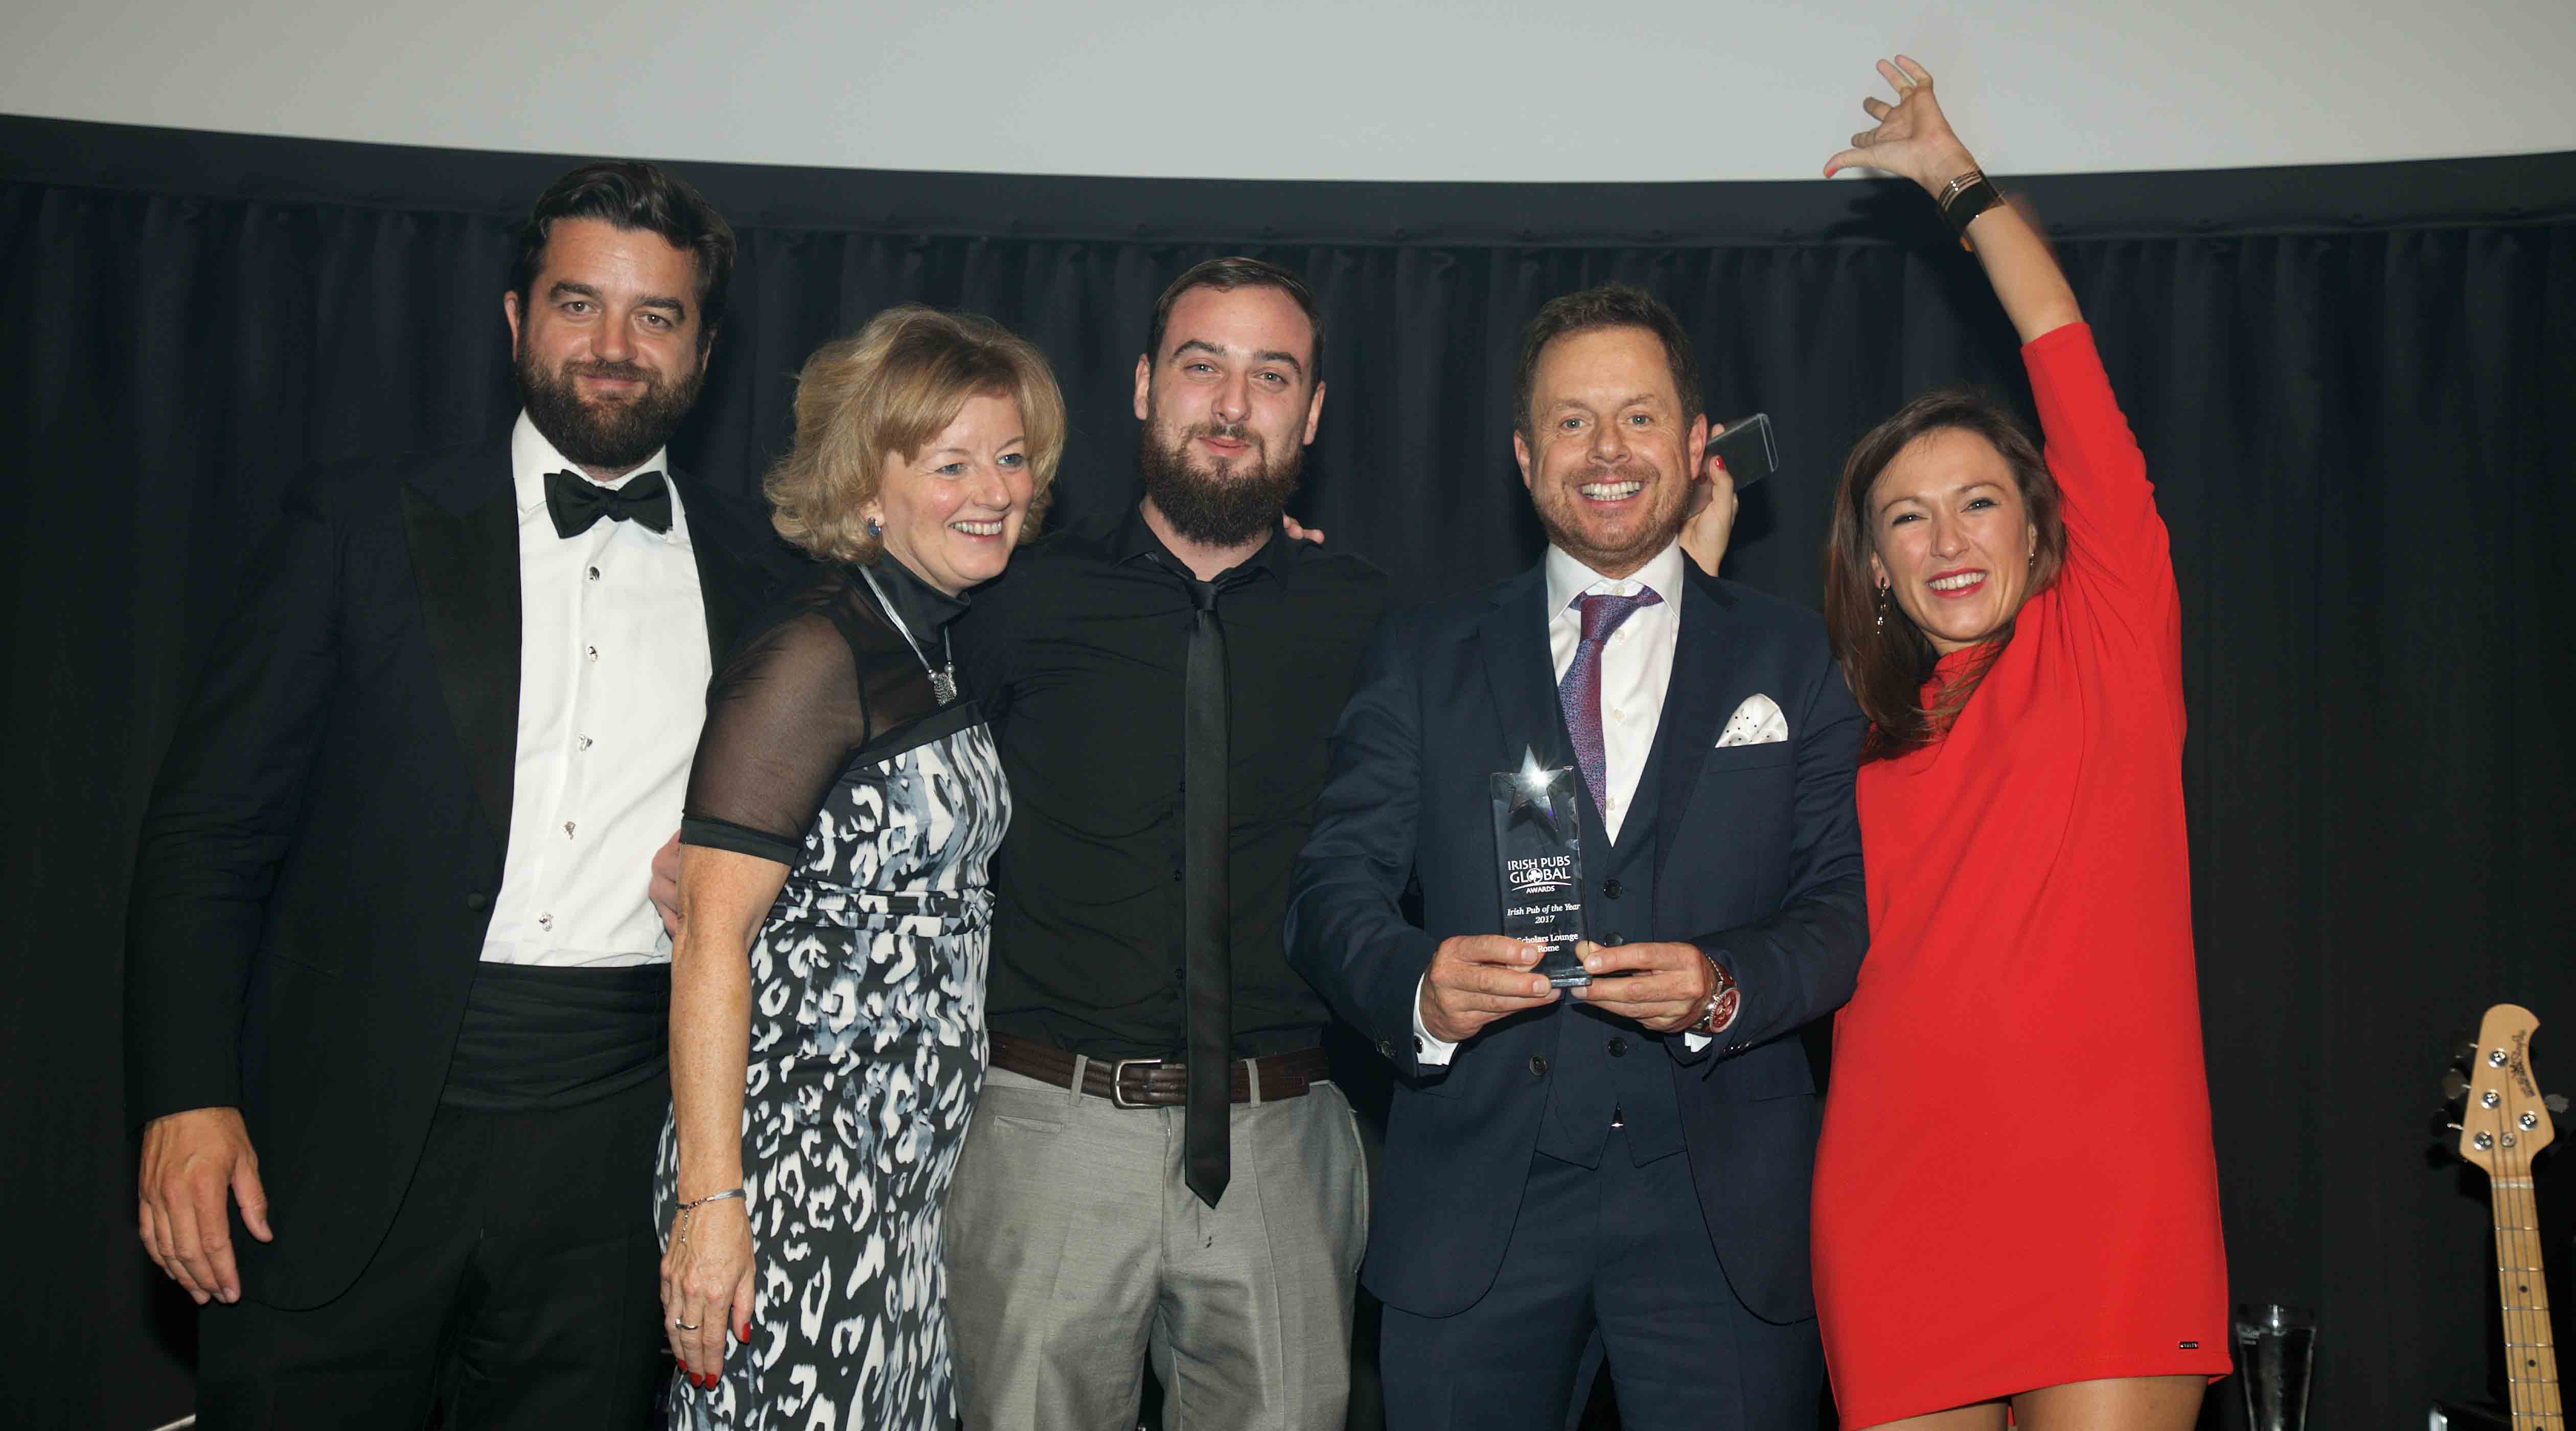 Scholars Lounge from Rome celebrate their win at the Irish Pubs Global Awards.